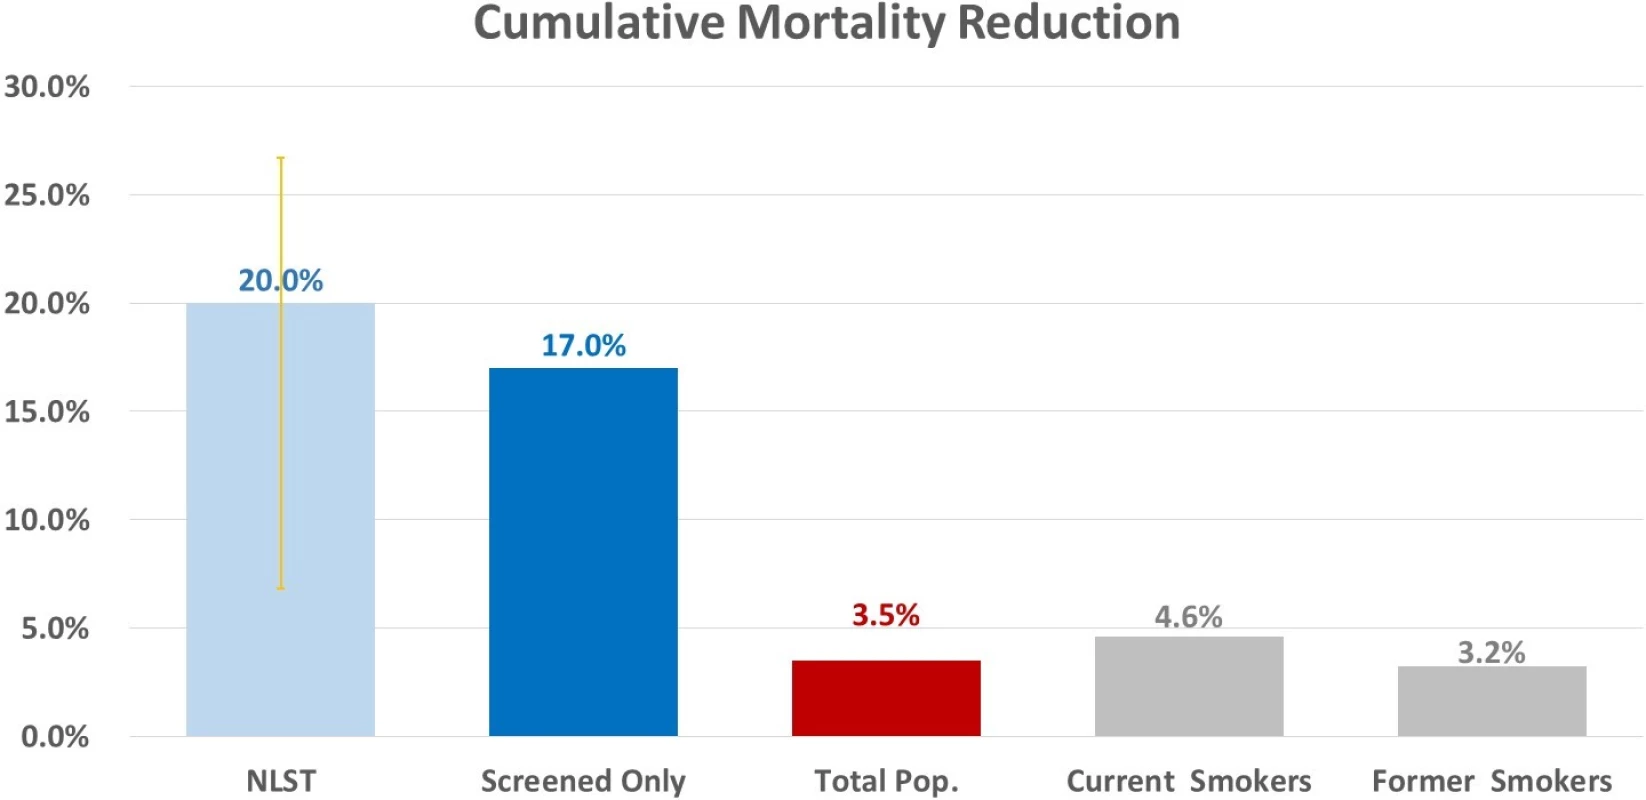 Projected cumulative mortality reduction comparison to National Lung Screening Trial (NLST) results, 2016–2030.